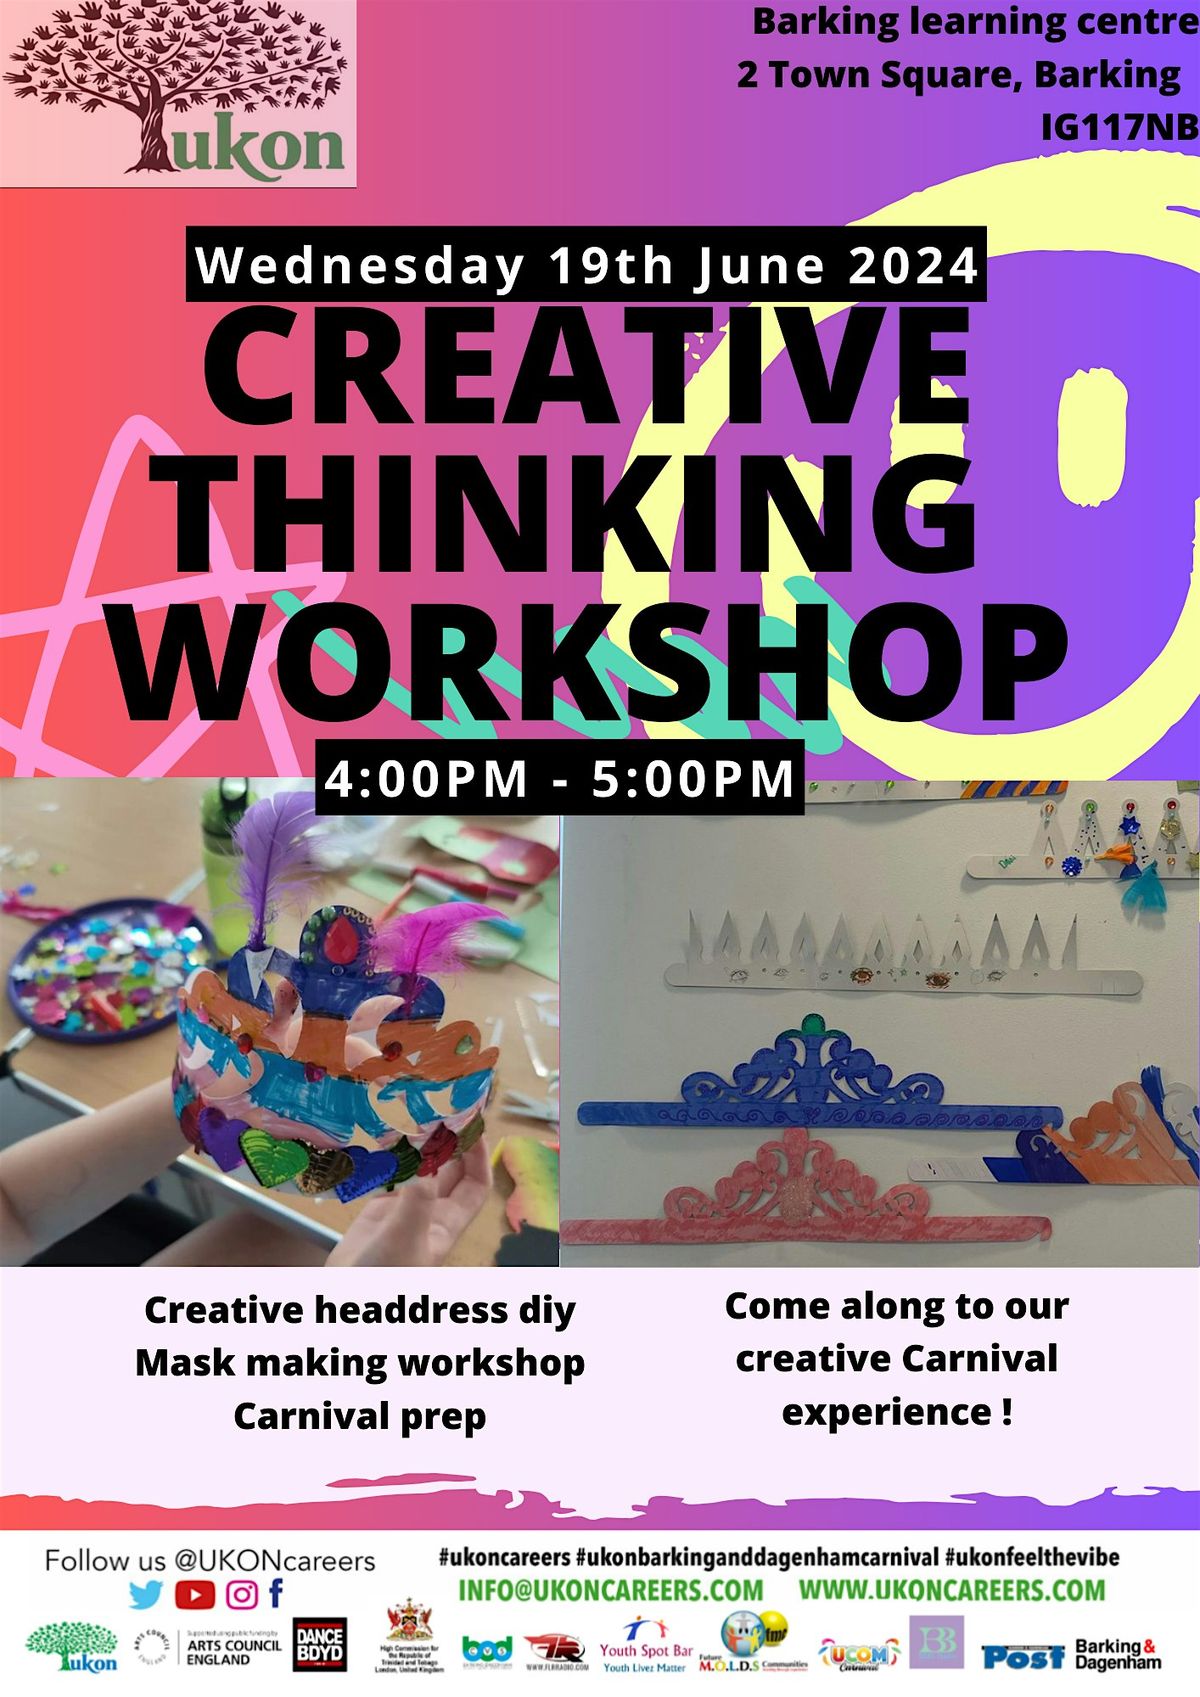 Creative Thinking Workshop @ the BLC